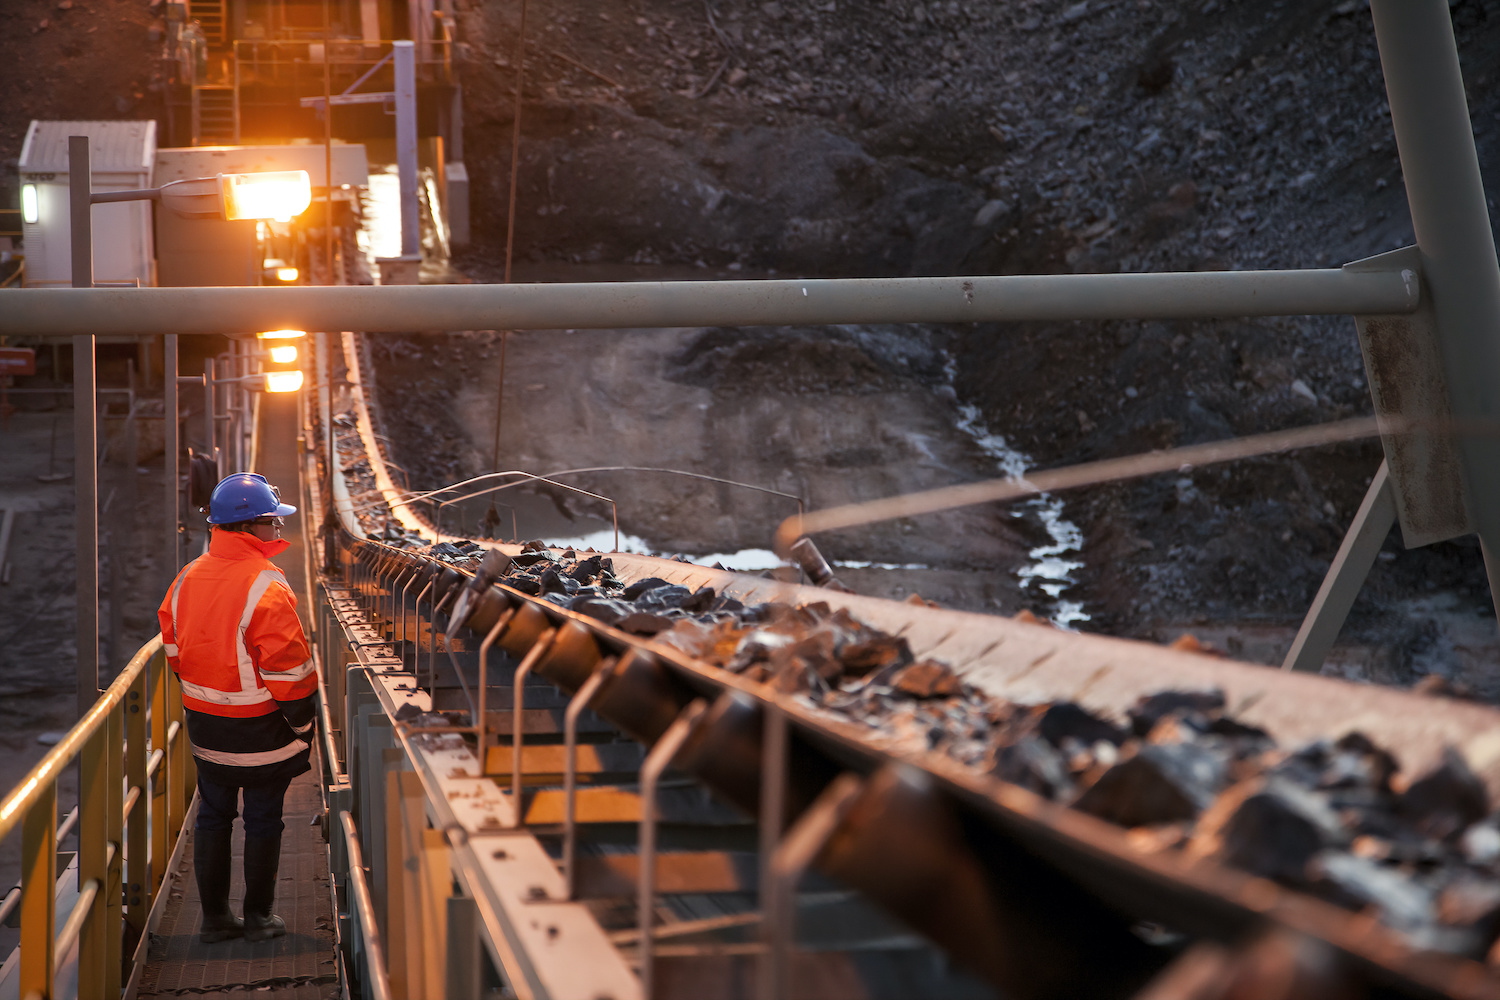 Nyngan Australia: Shallow depth of field image of a miner inspecting ore rocks on a conveyor in NSW Australia